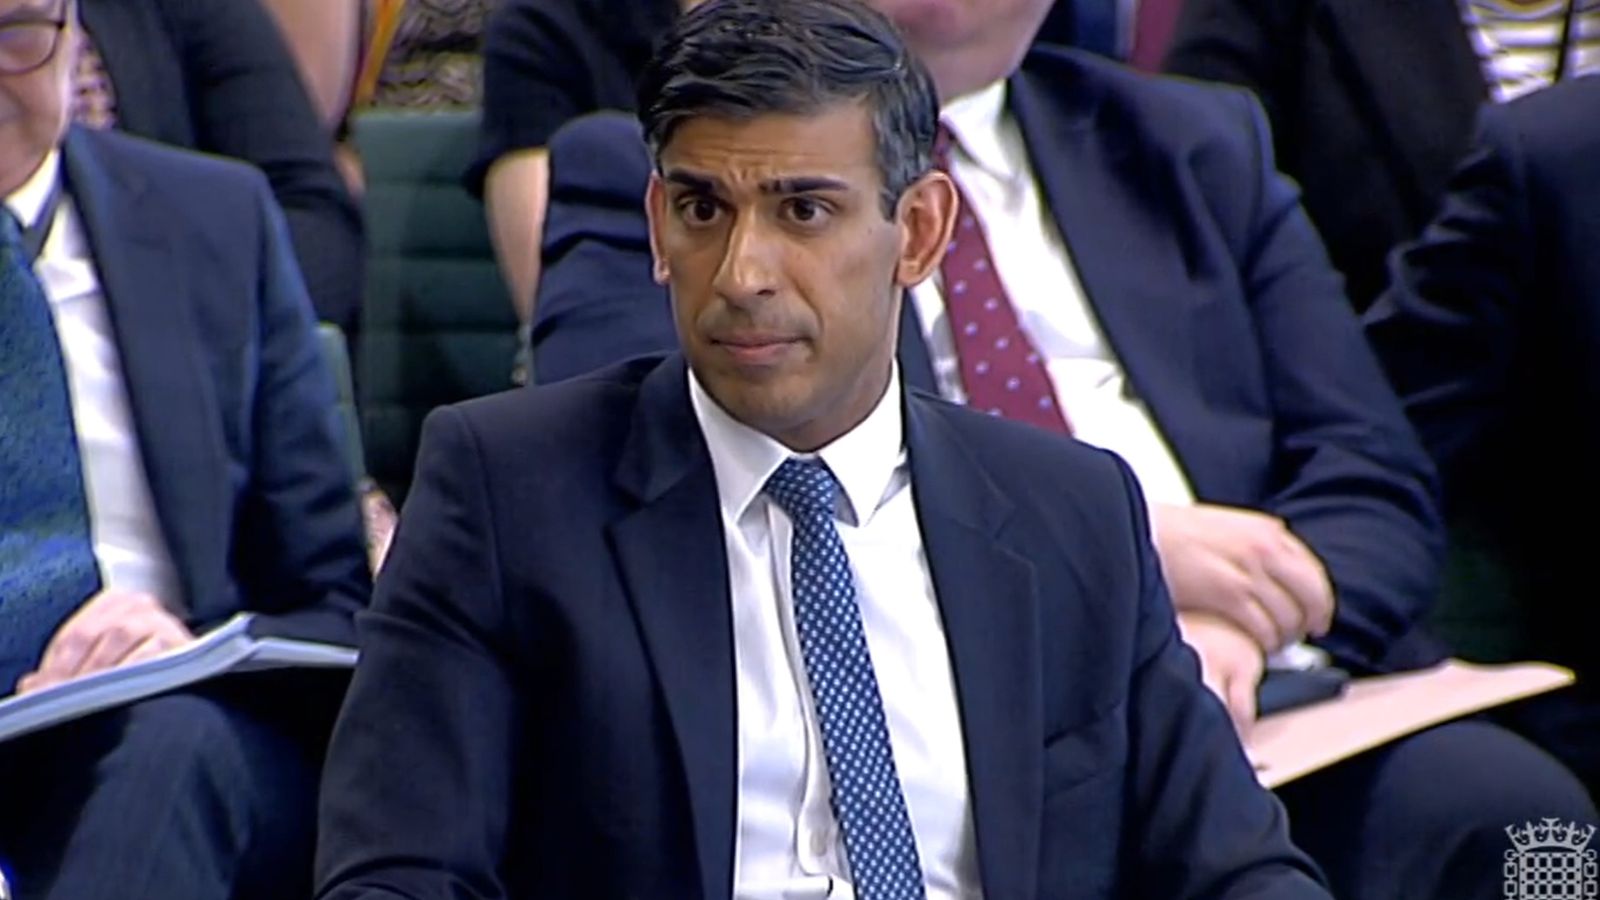 Rishi Sunak's costly COVID Inquiry legal challenge was doomed to failure - and has now been kicked into touch